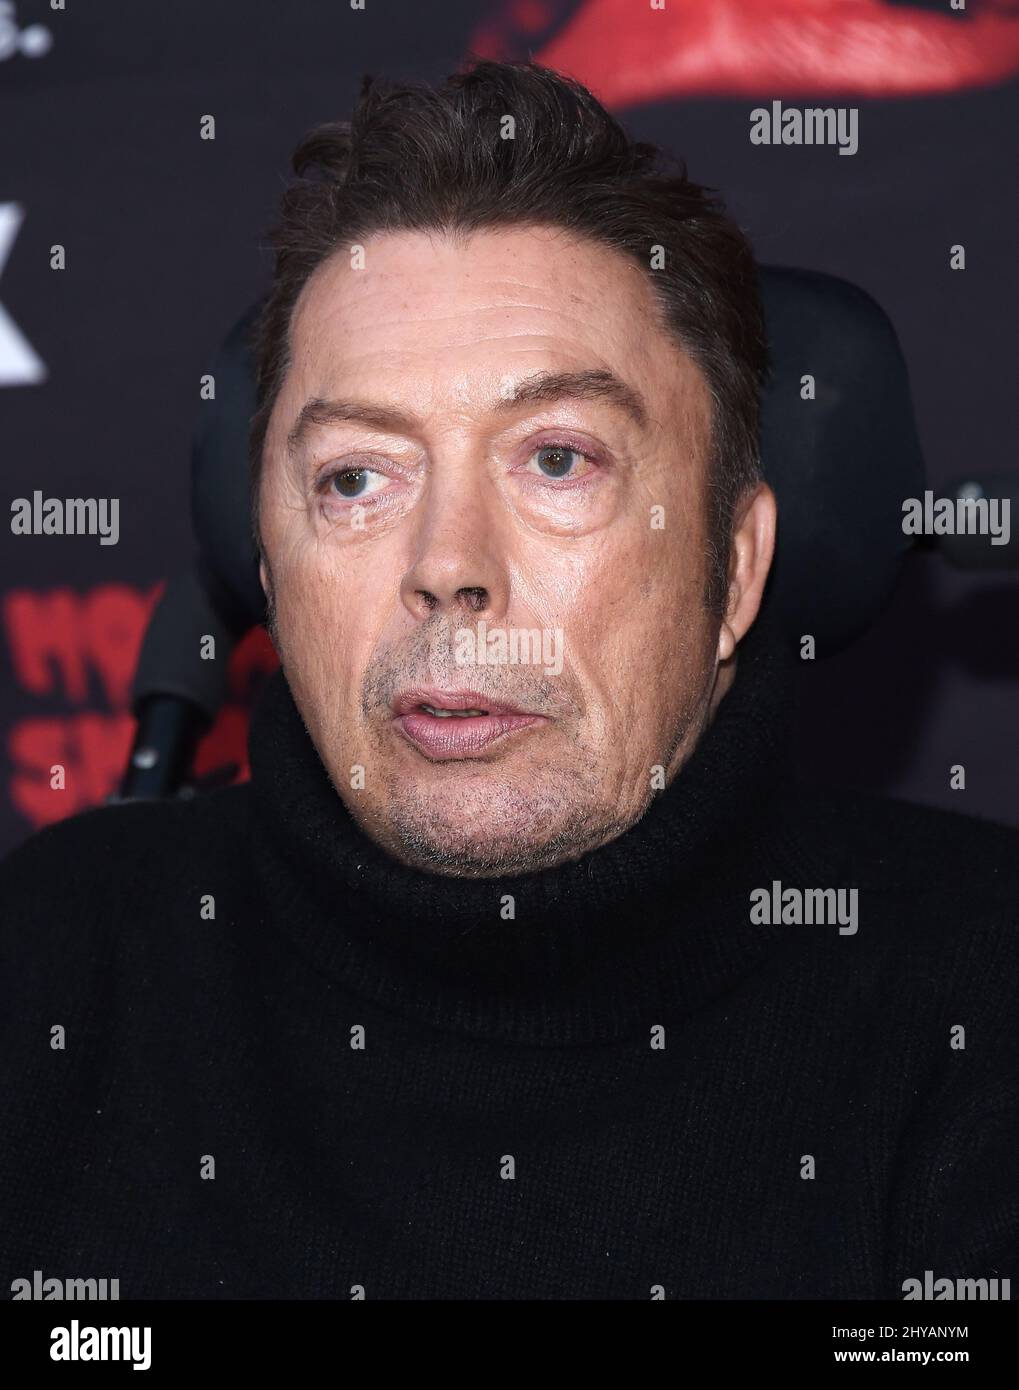 Tim Curry attending the Rocky Horror Picture Show: Let's Do The Time Warp Again Premiere held at The Roxy, in Los Angeles, California. Stock Photo